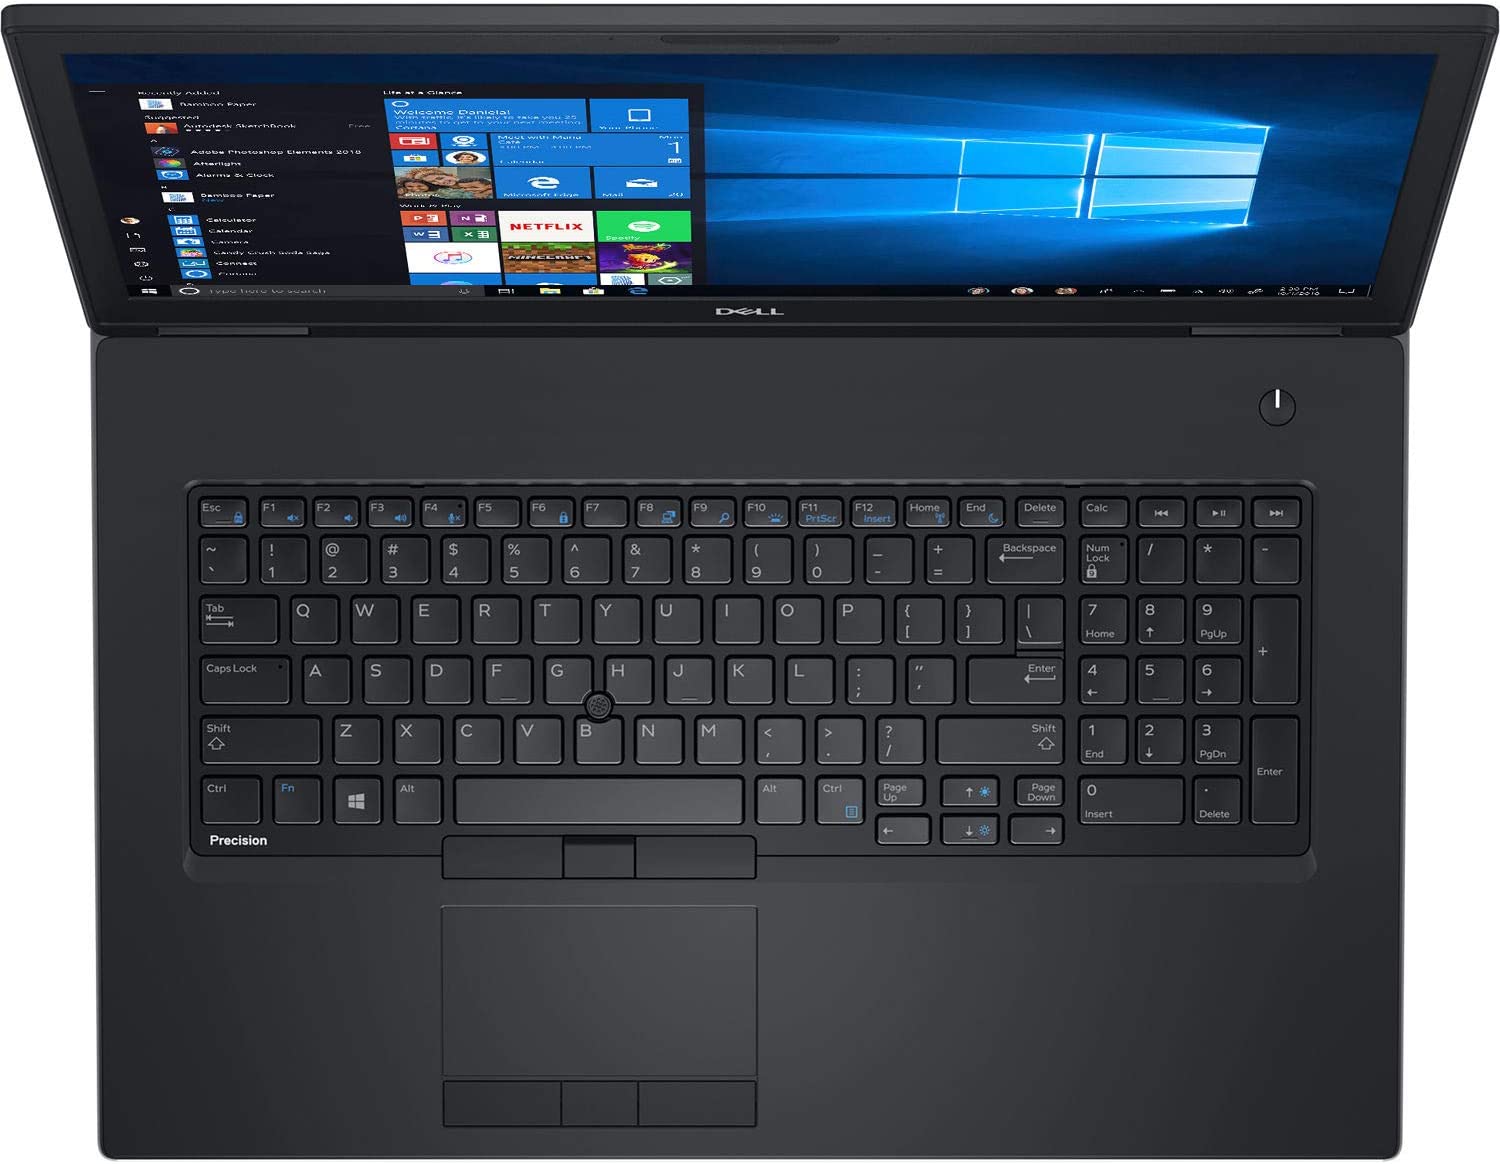 This image shows the Dell Precision 17 7730.